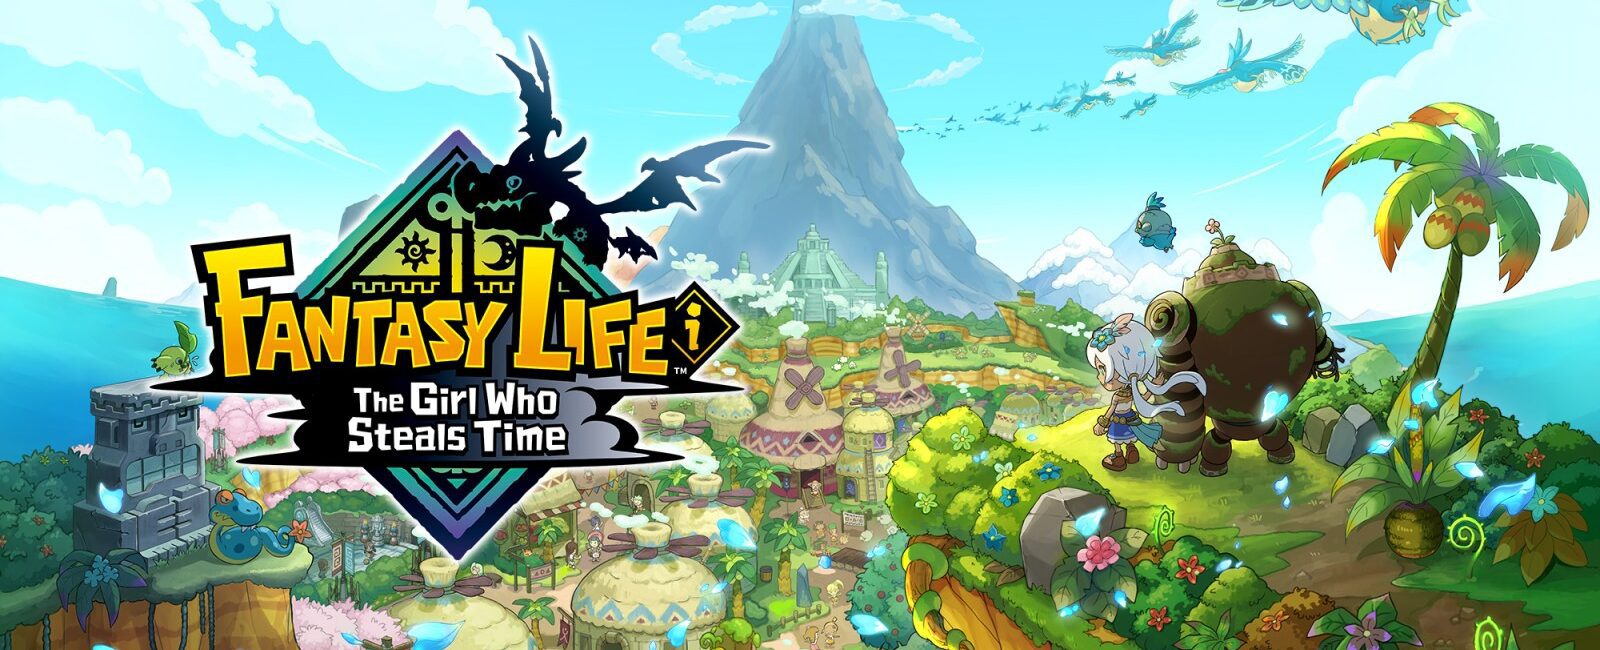 FANTASY LIFE i: The Girl Who Steals Time game header nintendo switch